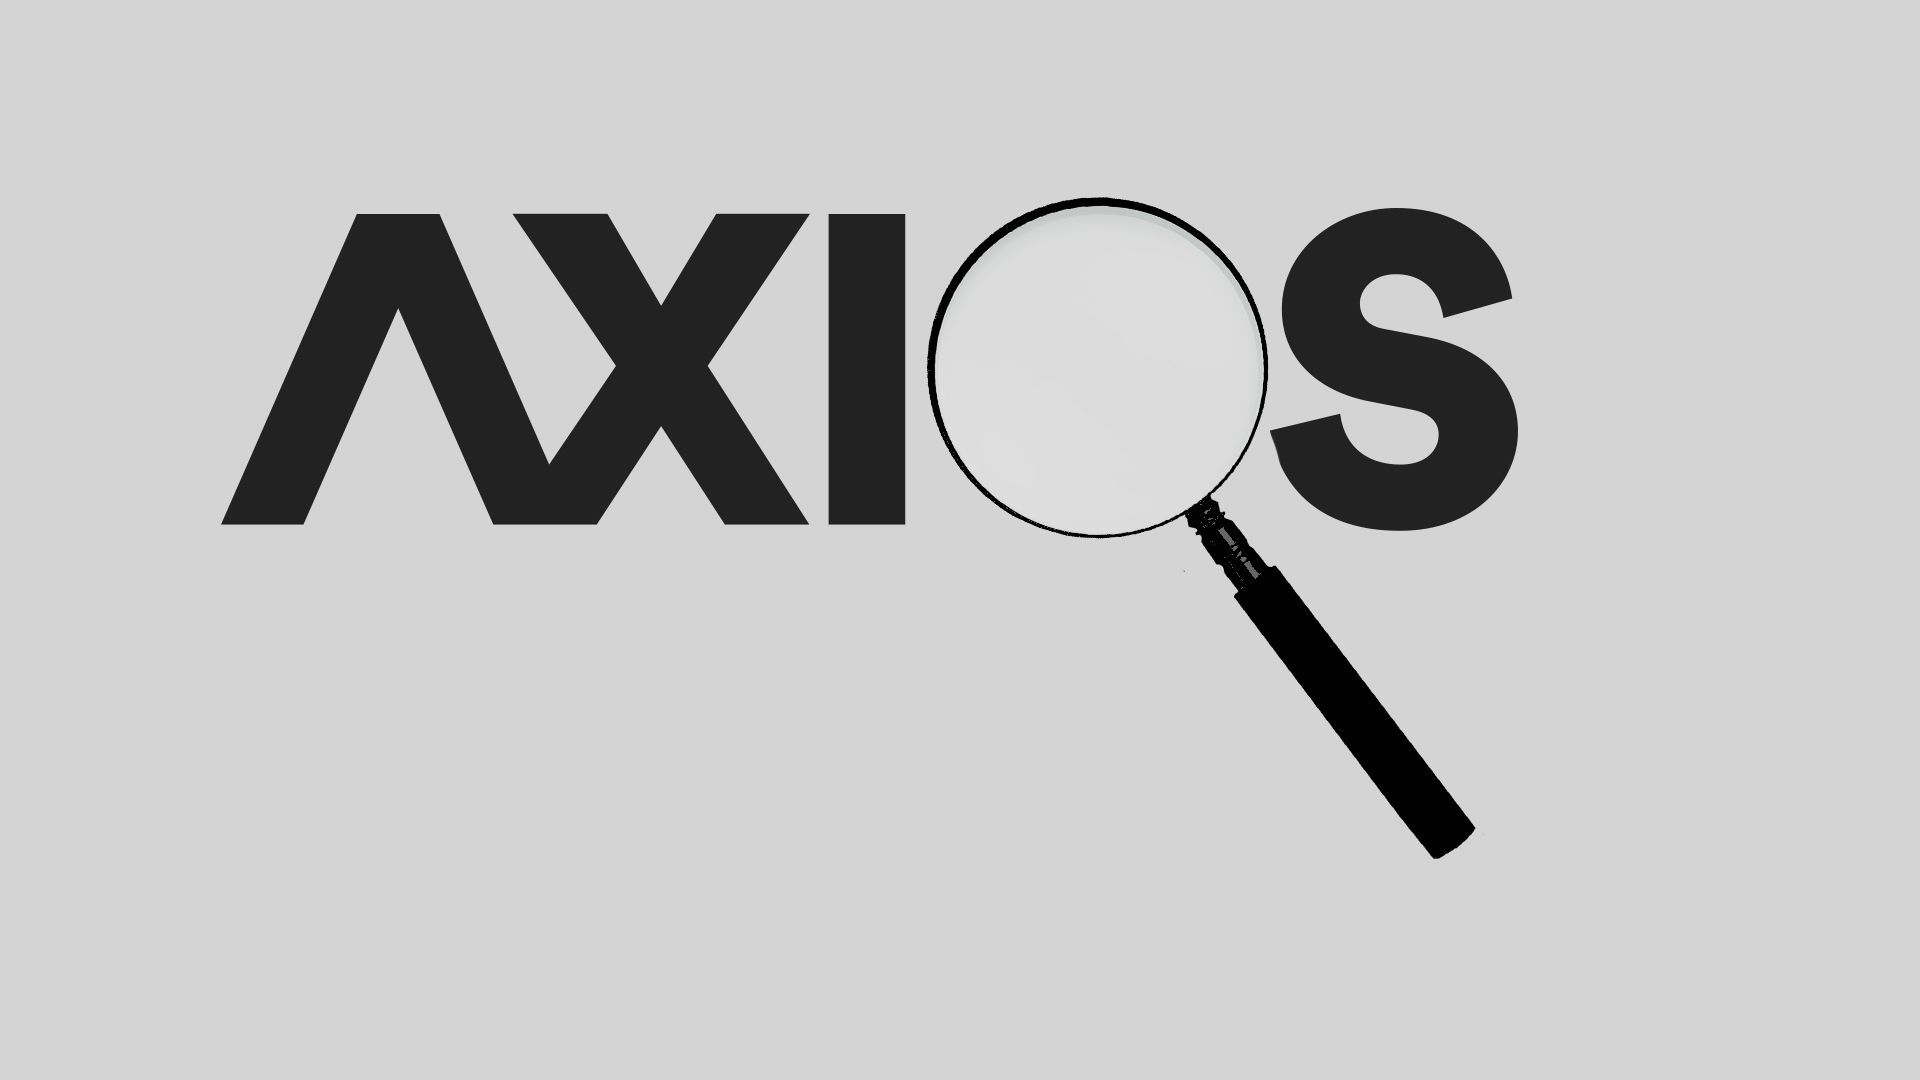 The Axios logo with a magnifying glass as the "o"